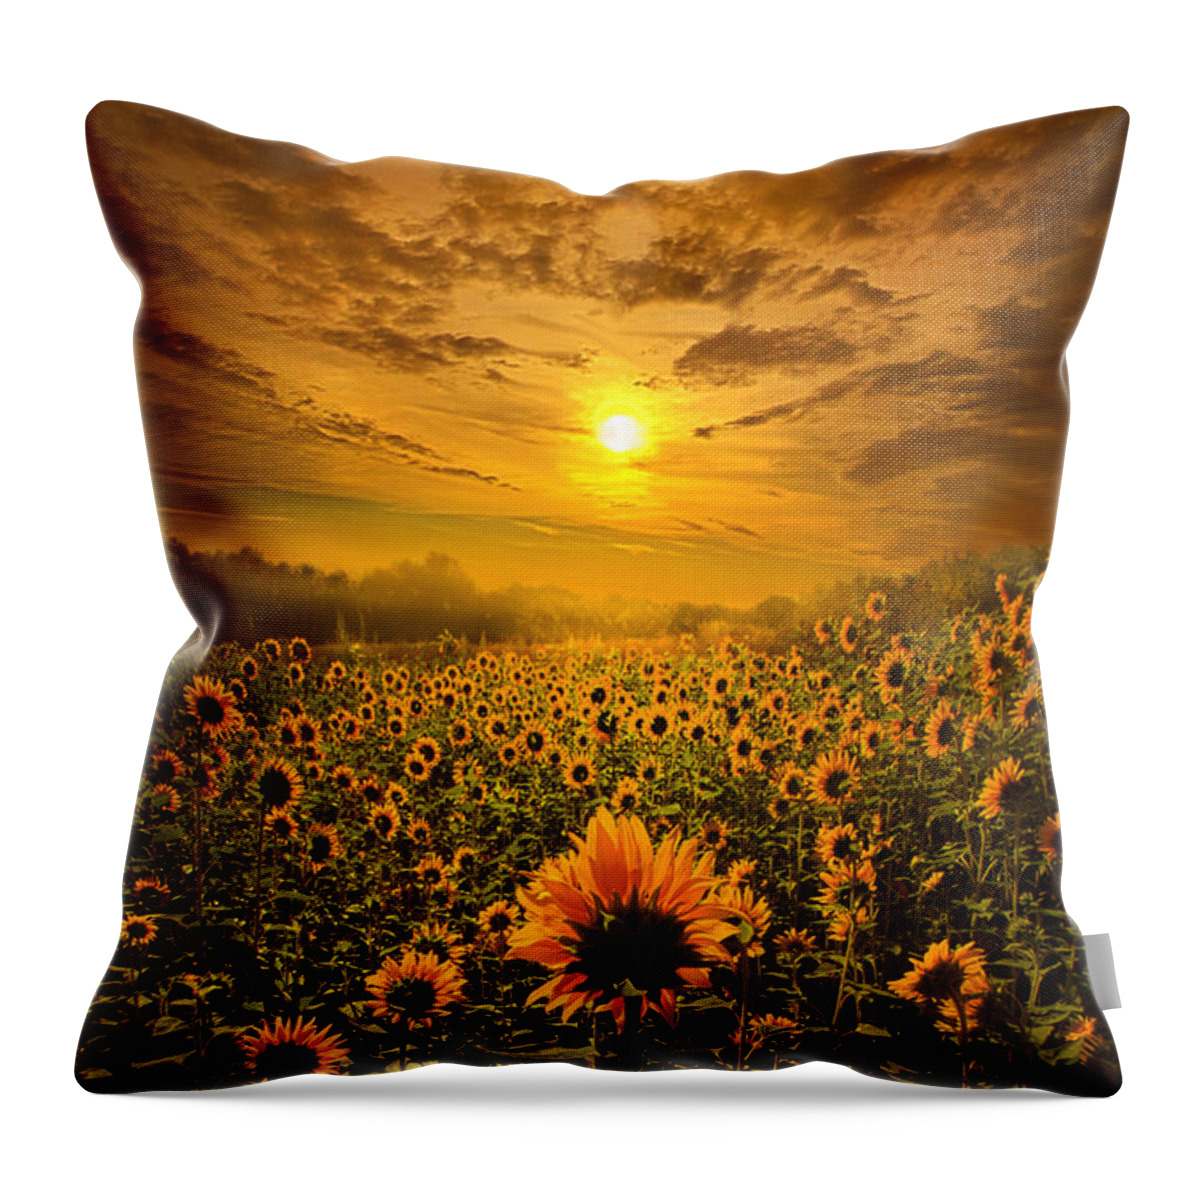 Sun Flowers Throw Pillow featuring the photograph I Believe In New Beginnings by Phil Koch